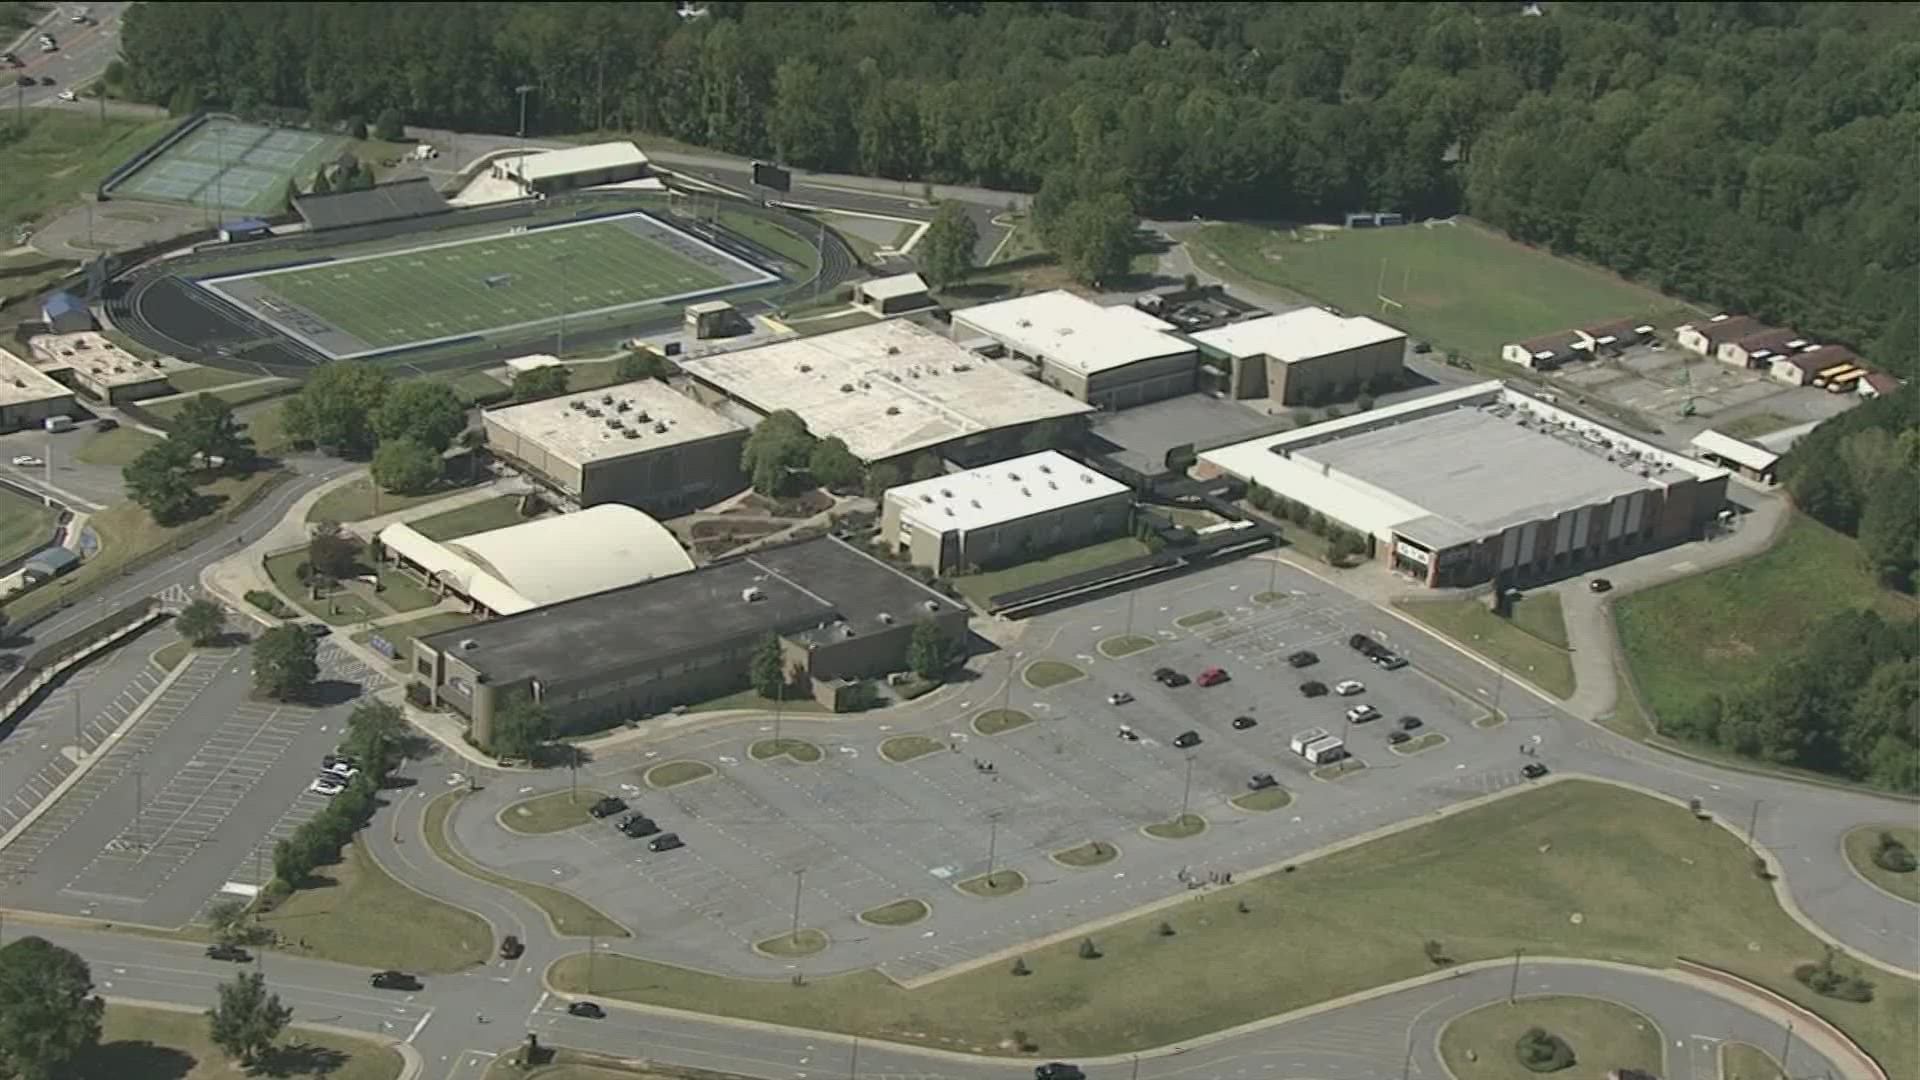 A 15-year-old girl faces felony charges after police say she made a bomb threat call that evacuated Etowah High School two weeks ago.